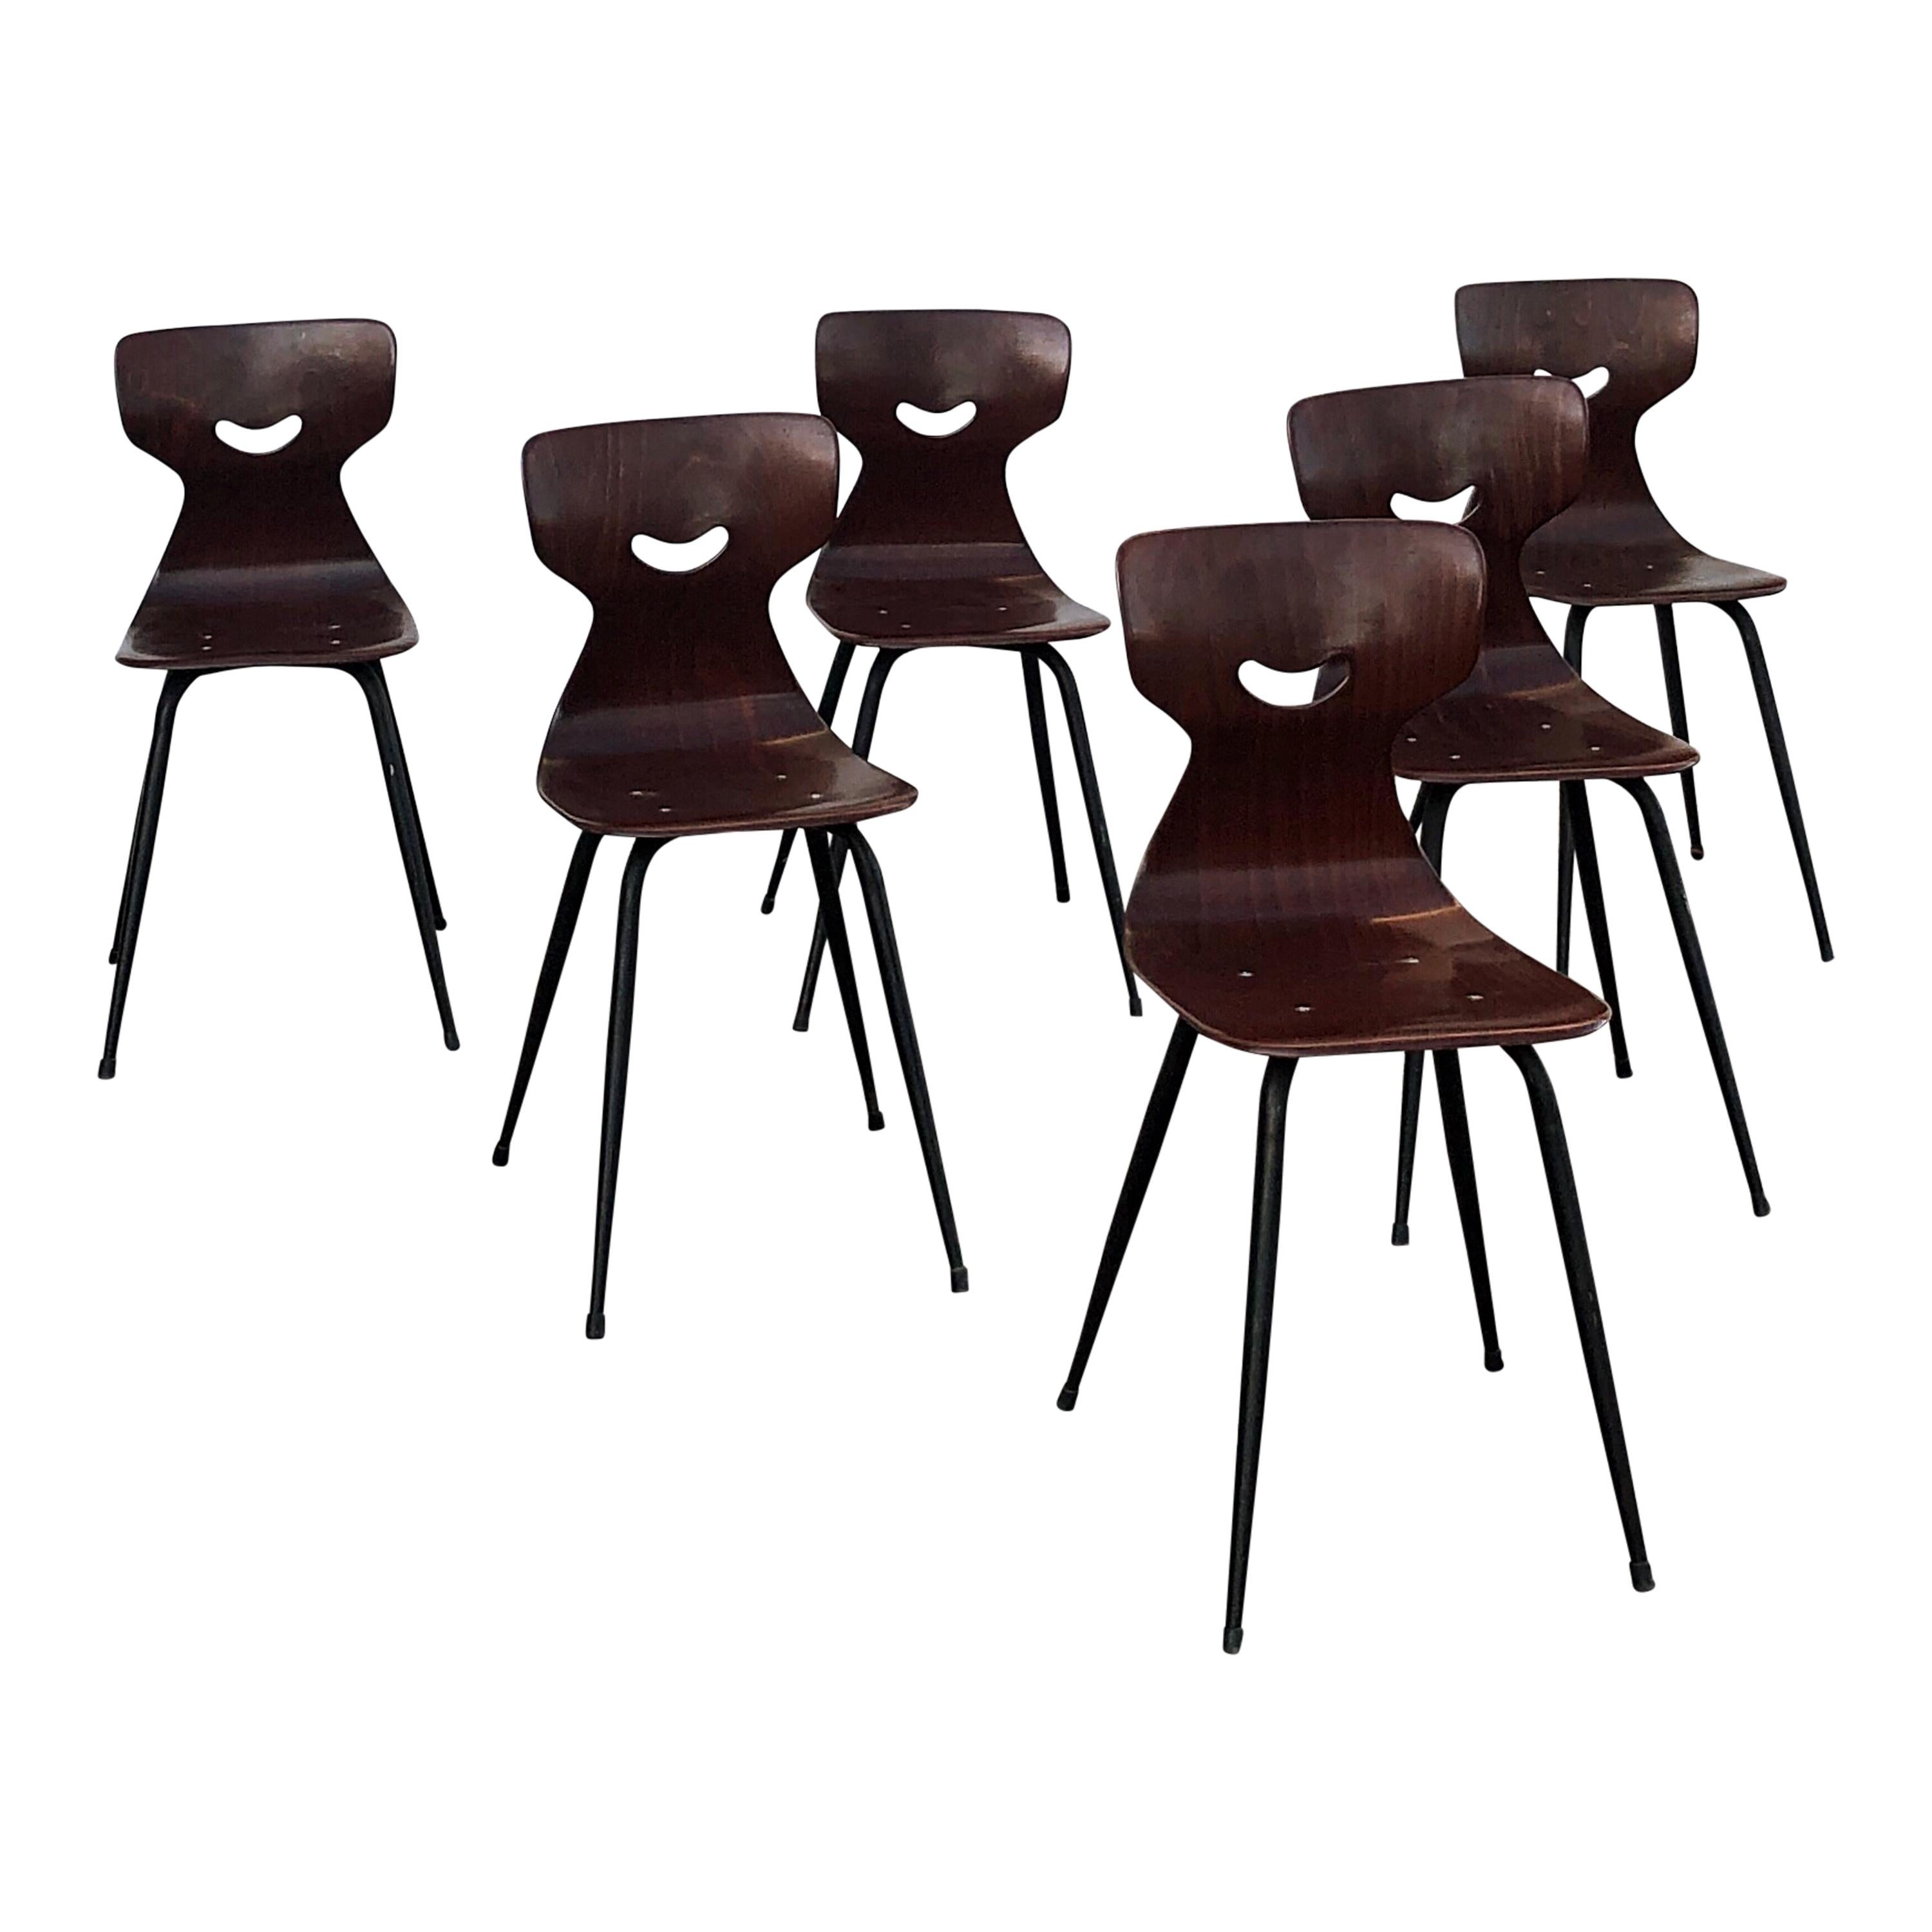 Beautiful industrial strength molded chairs designed by Adam Stegner.
 Made from strong Pagwood shaped seats (Pagwood is high density laminated compressed wood, with orthopedic pelvic and back support without adjustment), set on strong iron tapered